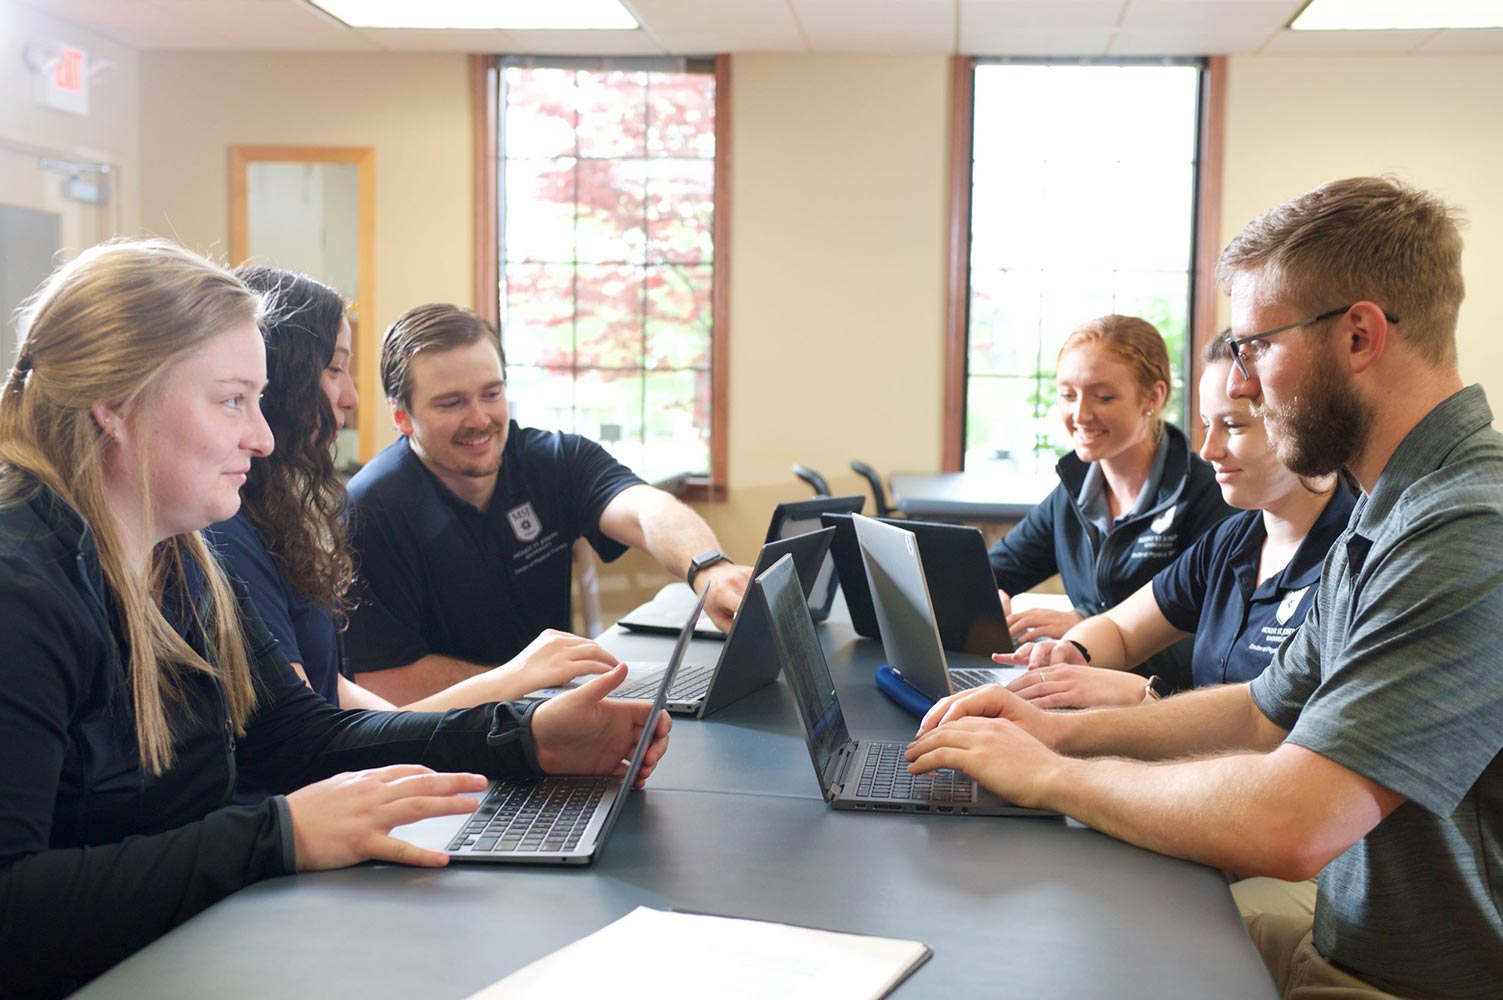 Image of Physical Therapy Students studying together.